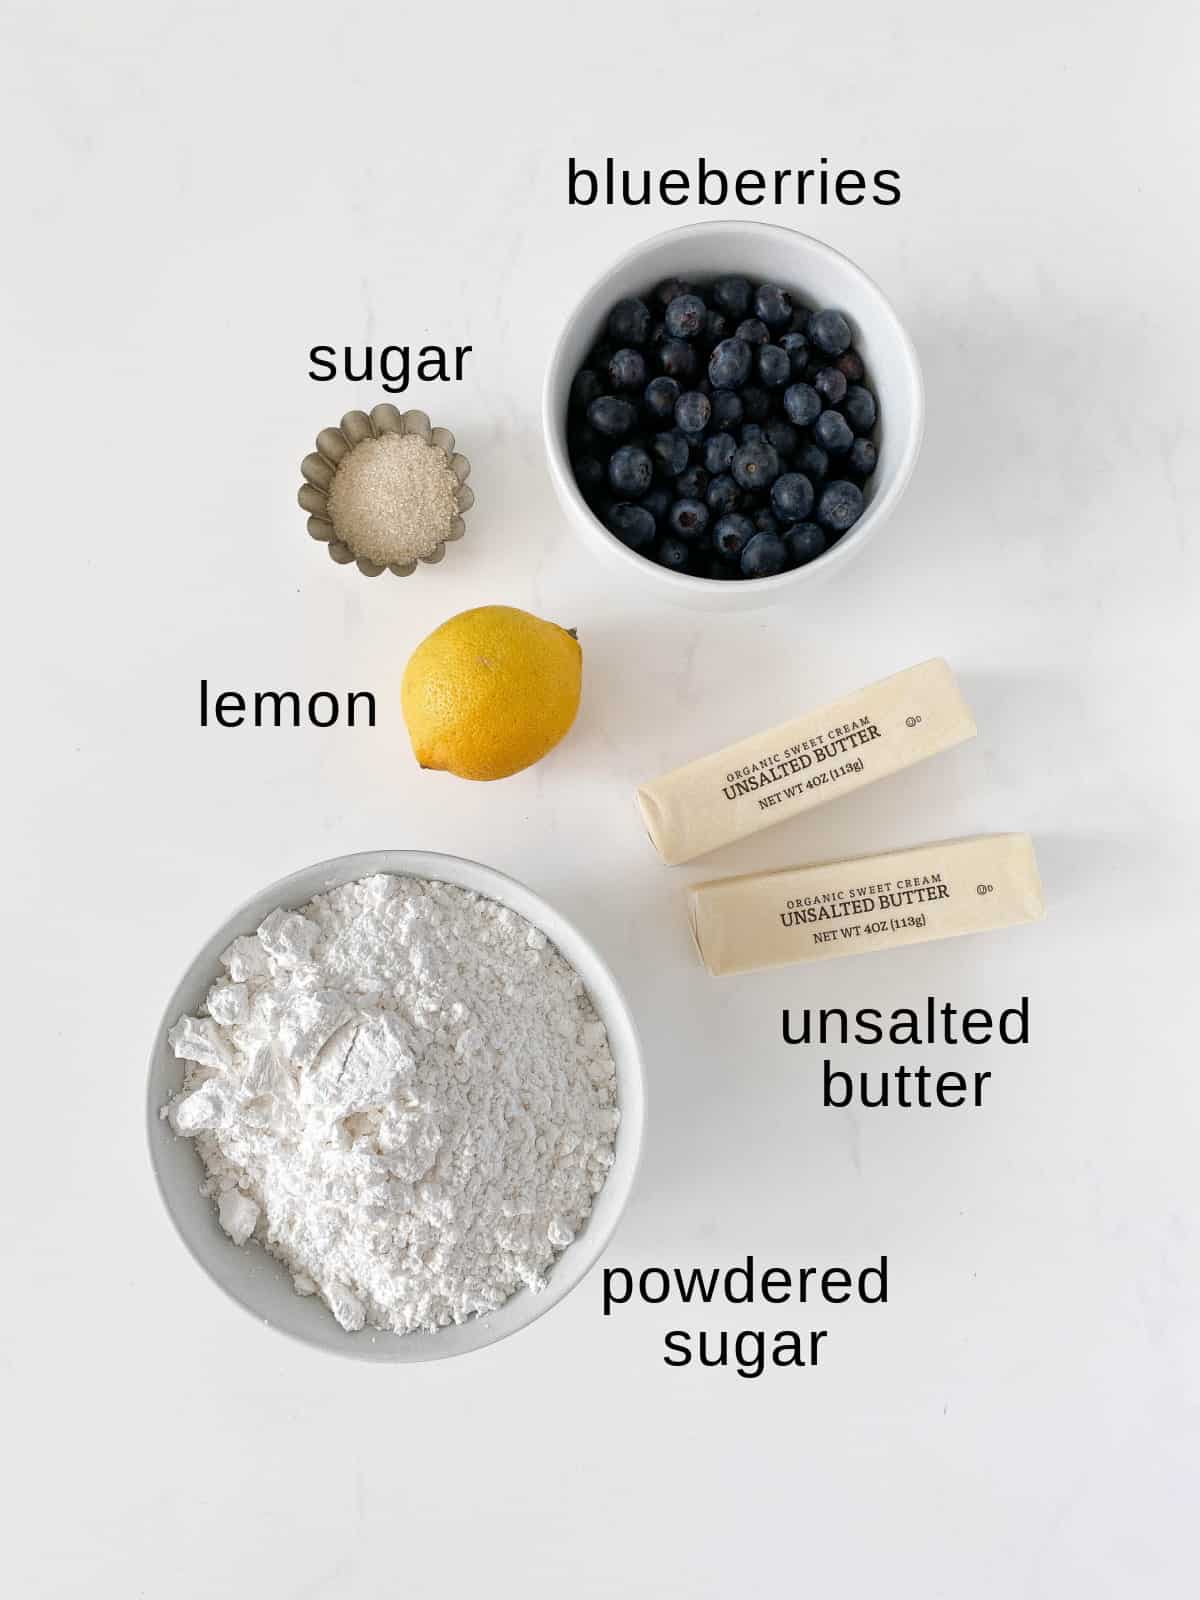 Blueberry buttercream ingredients on a white background.